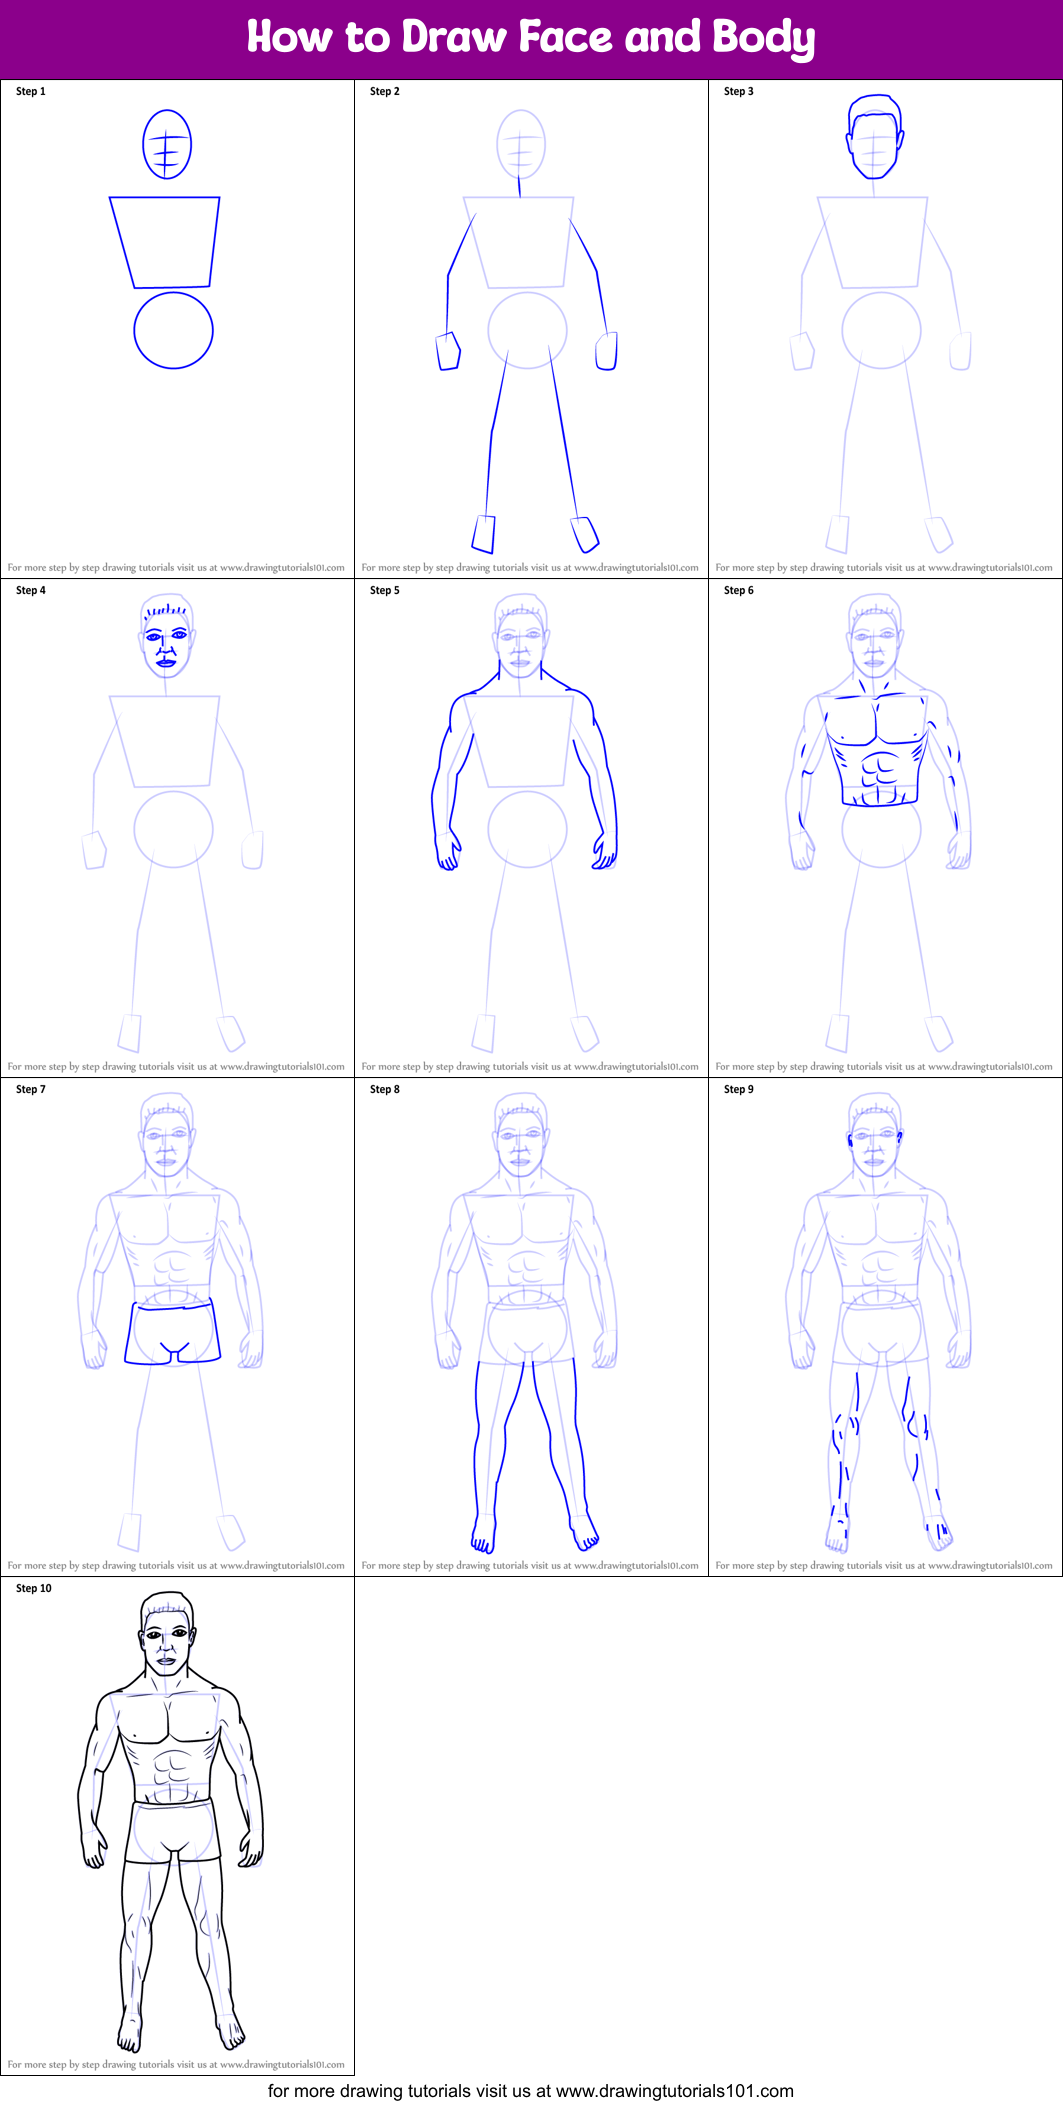 How to Draw Face and Body printable step by step drawing sheet